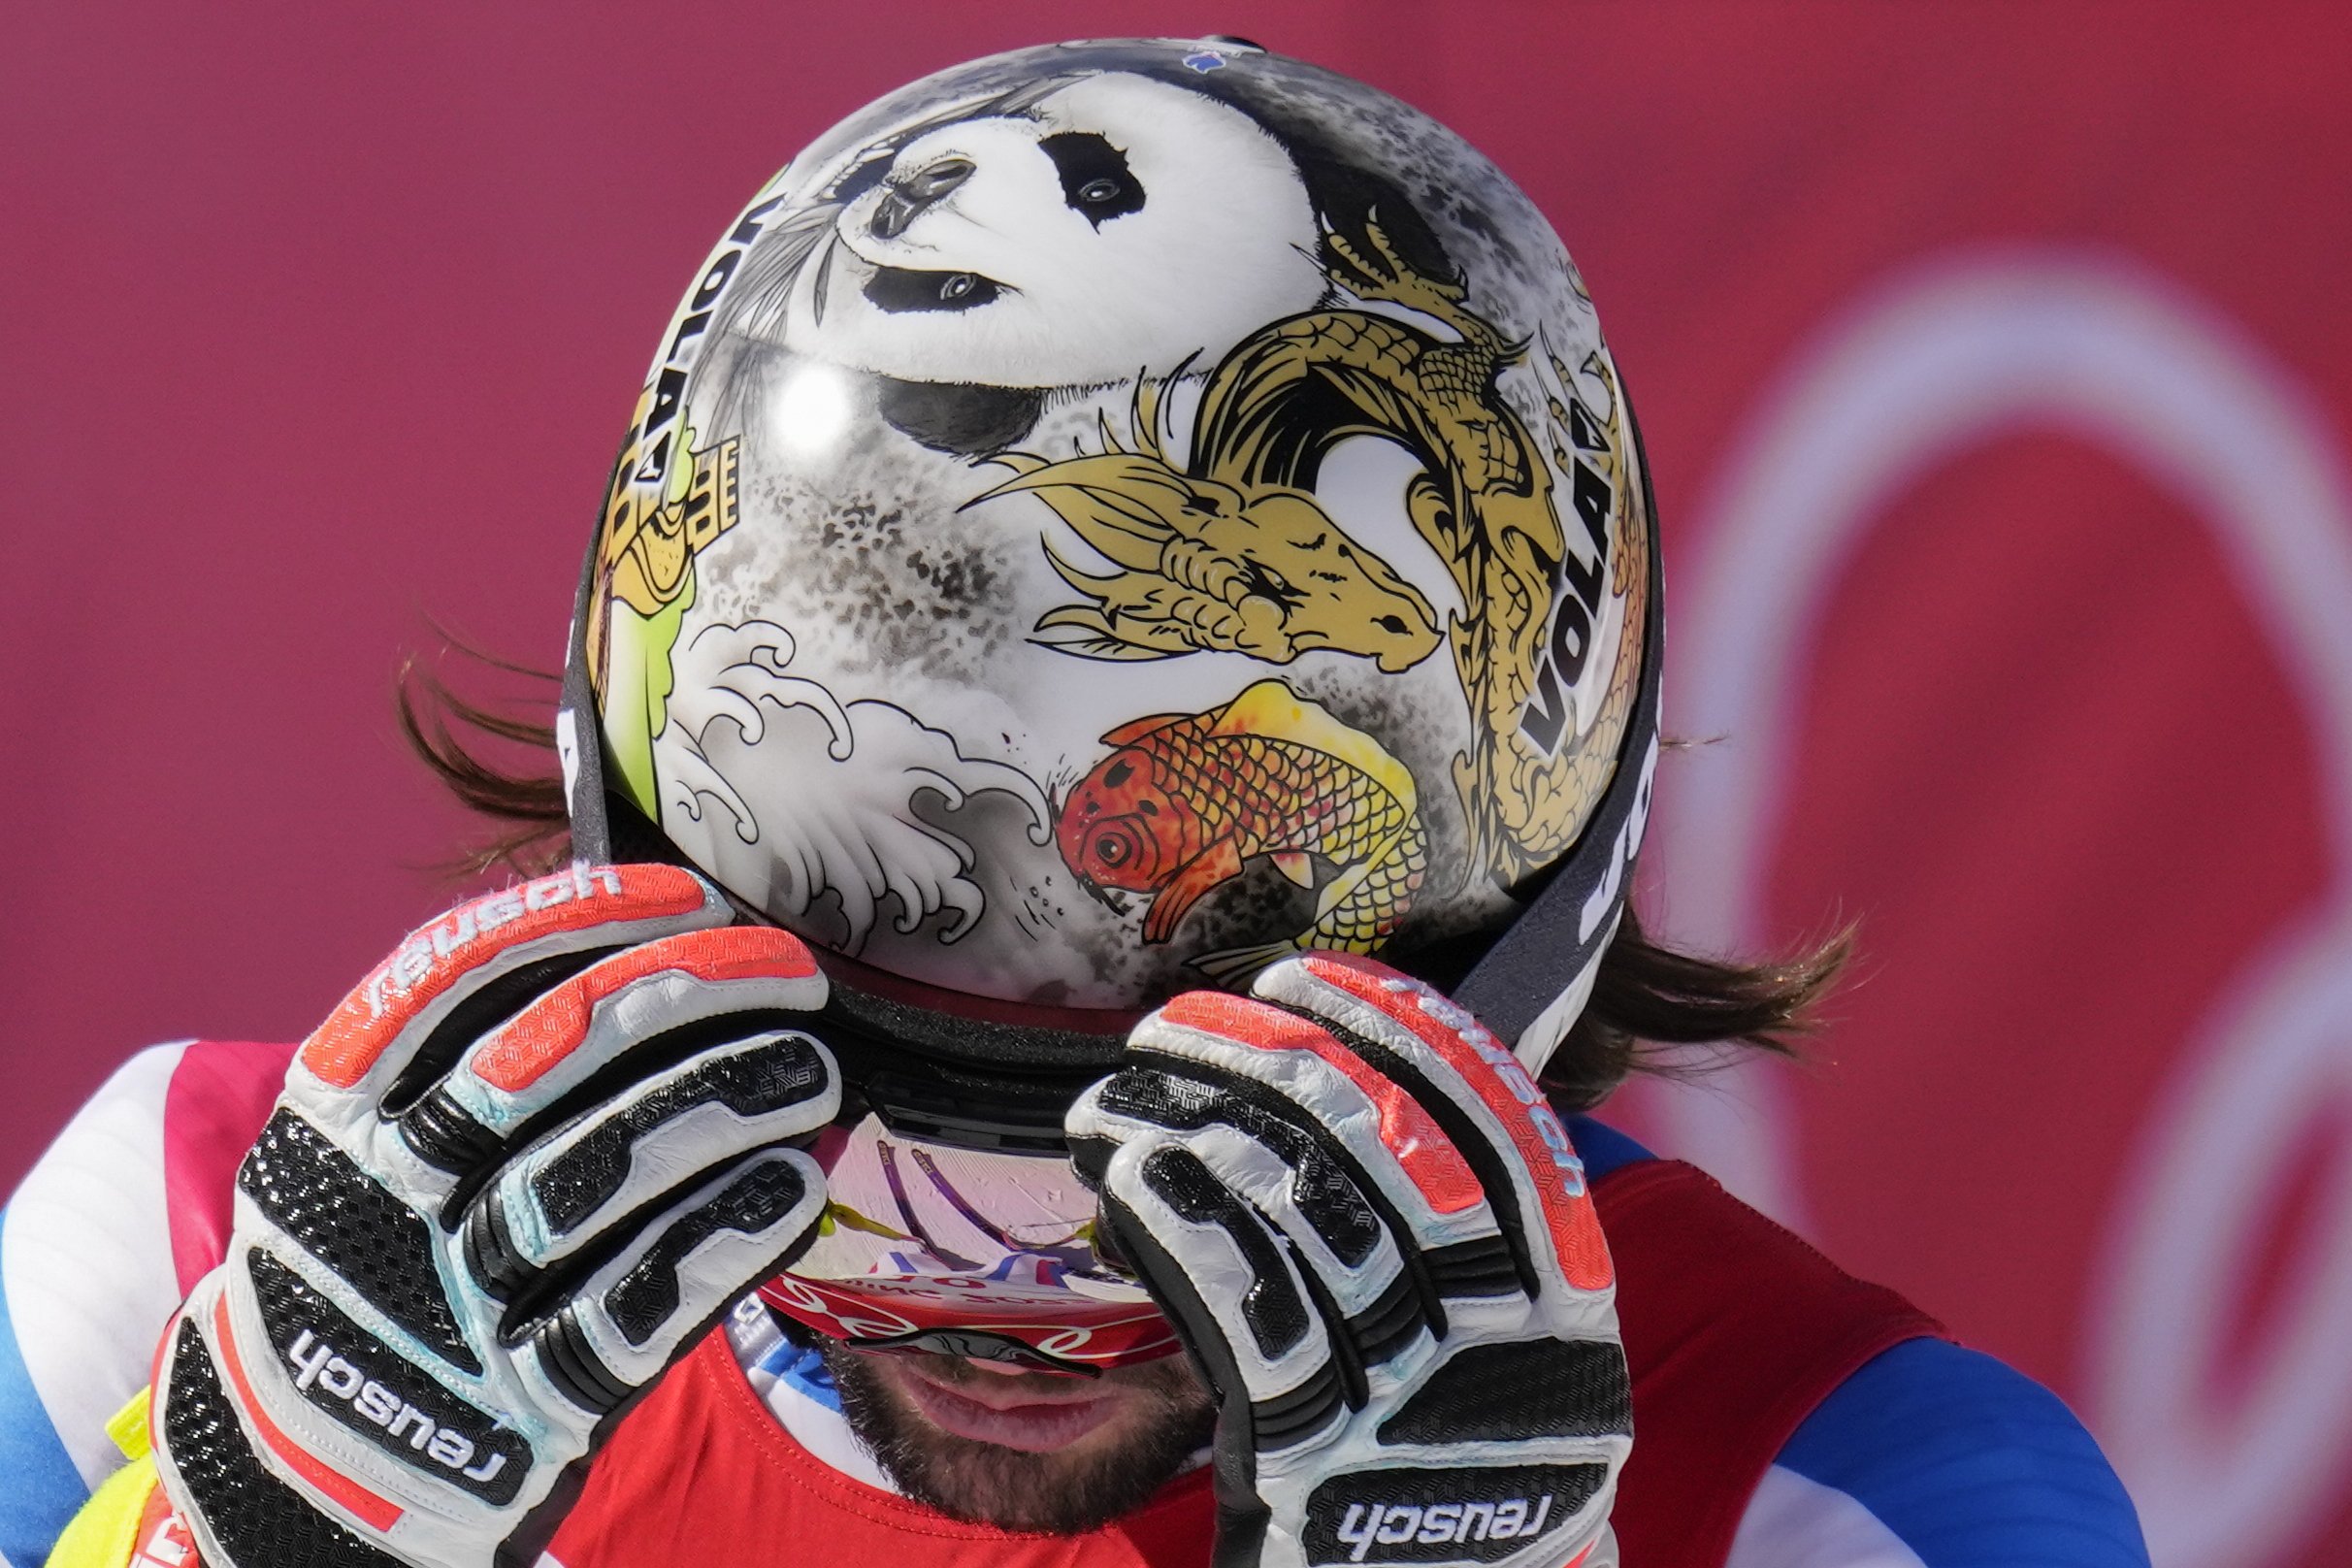  Matthieu Bailet, of France, removes his googles after finishing the men's downhill at the 2022 Winter Olympics, Monday, Feb. 7, 2022, in the Yanqing district of Beijing. (AP Photo/Luca Bruno) 